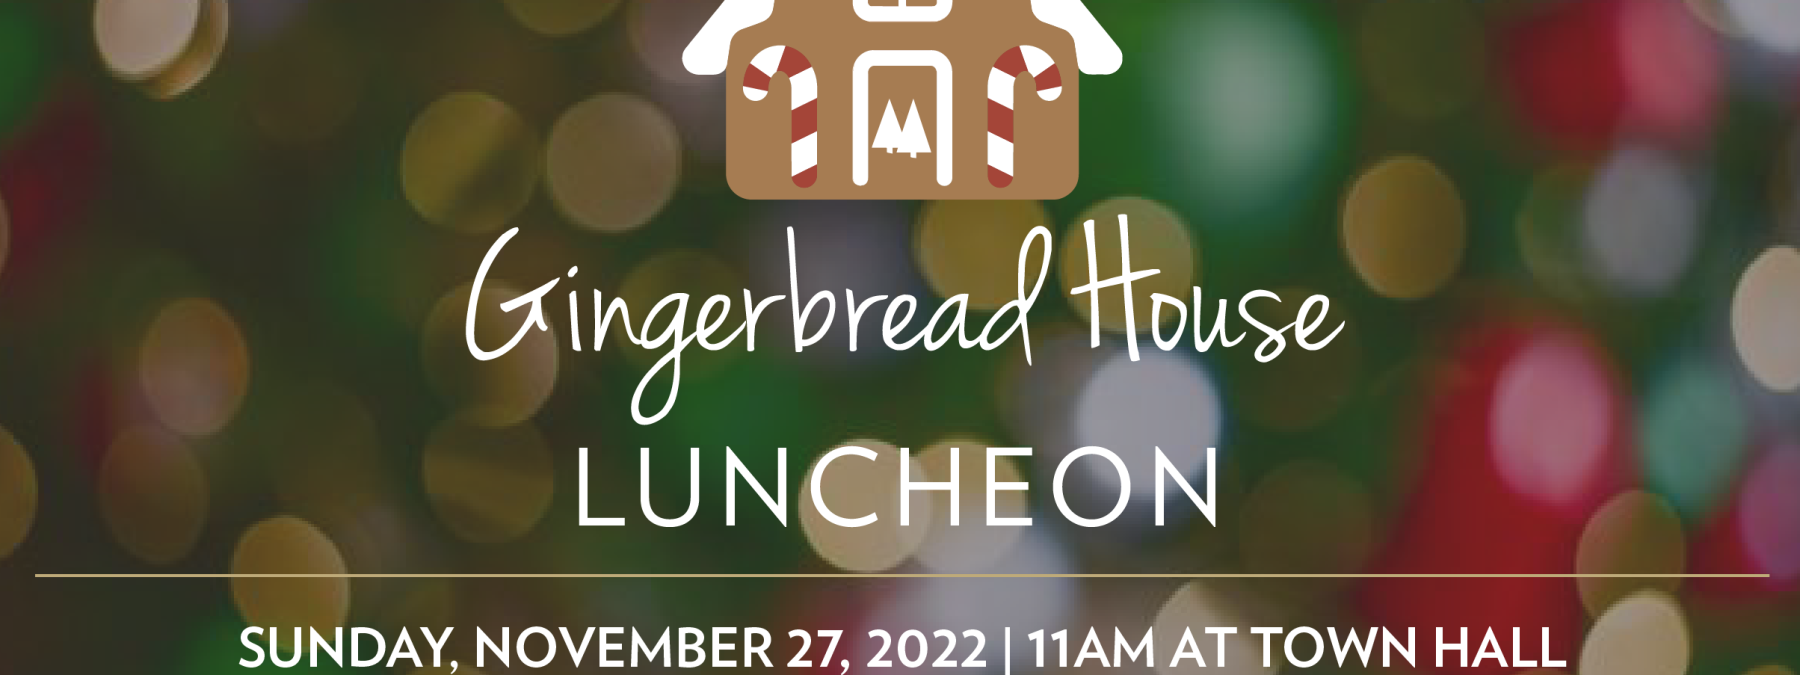 Reserve Now for Madden's Annual Gingerbread House Luncheon